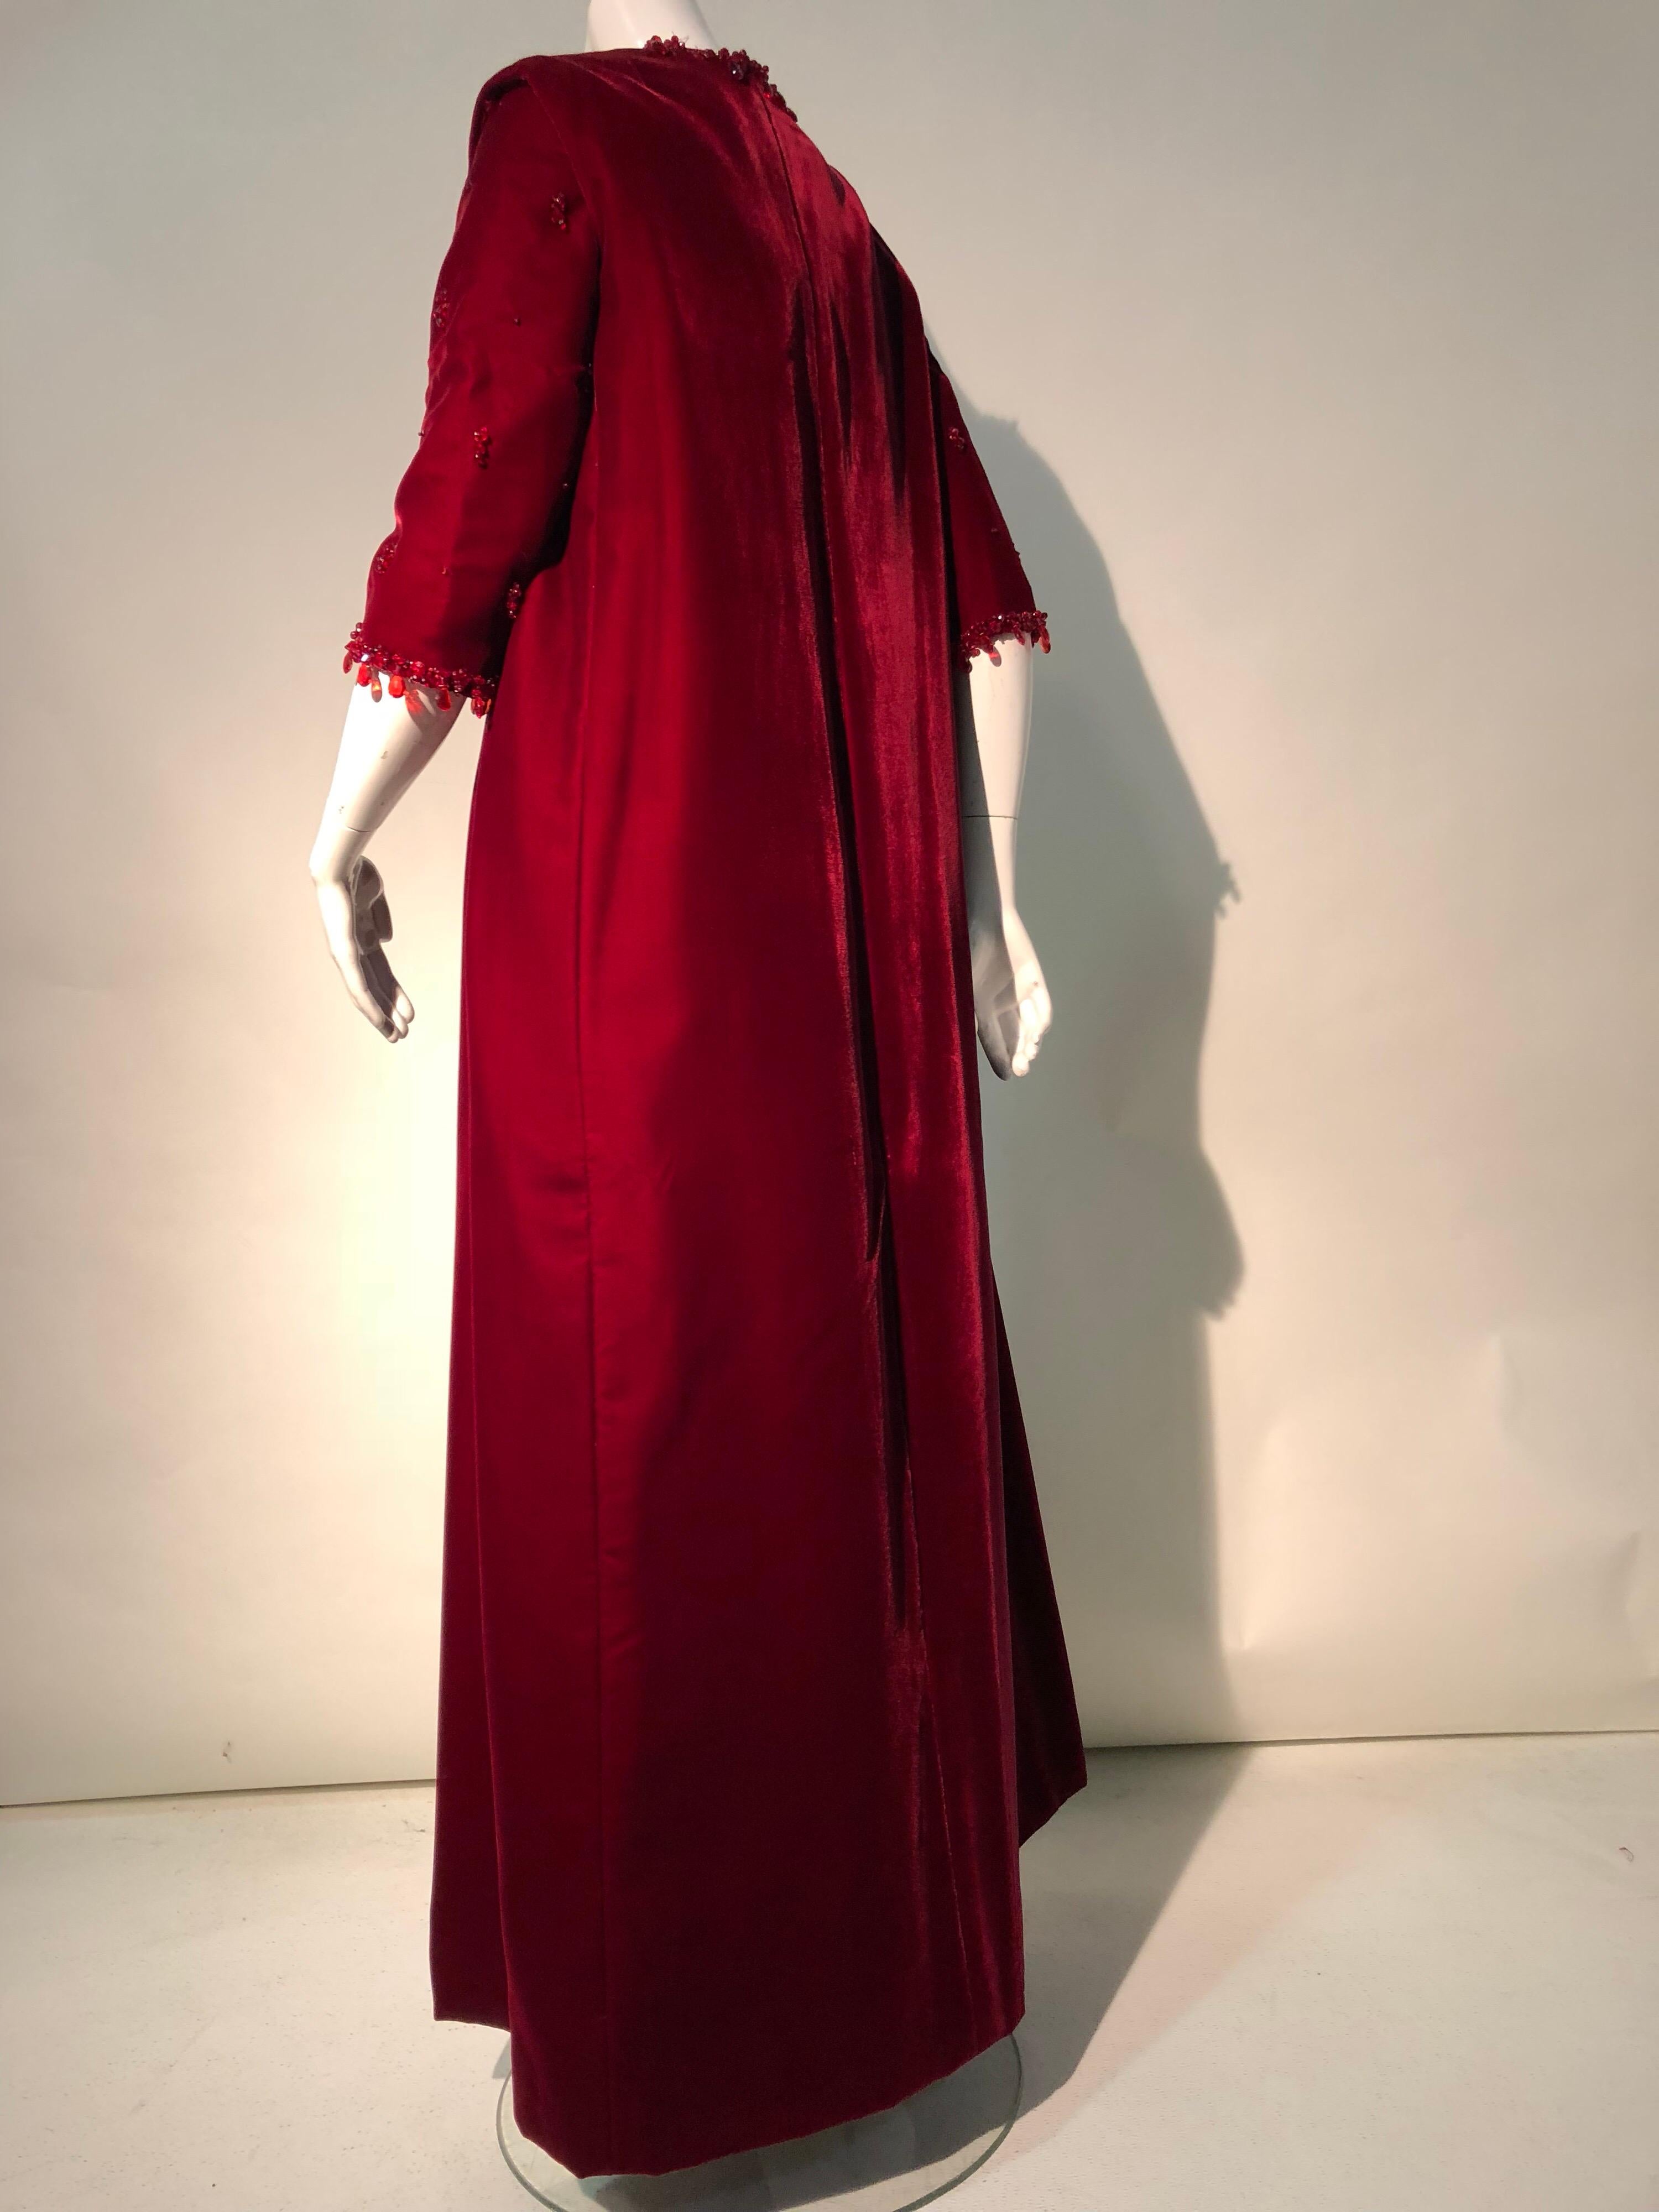 An incredible and rare 1960s Nina Ricci Couture ruby red evening ensemble: an evening gown with a portrait neckline, fitted 